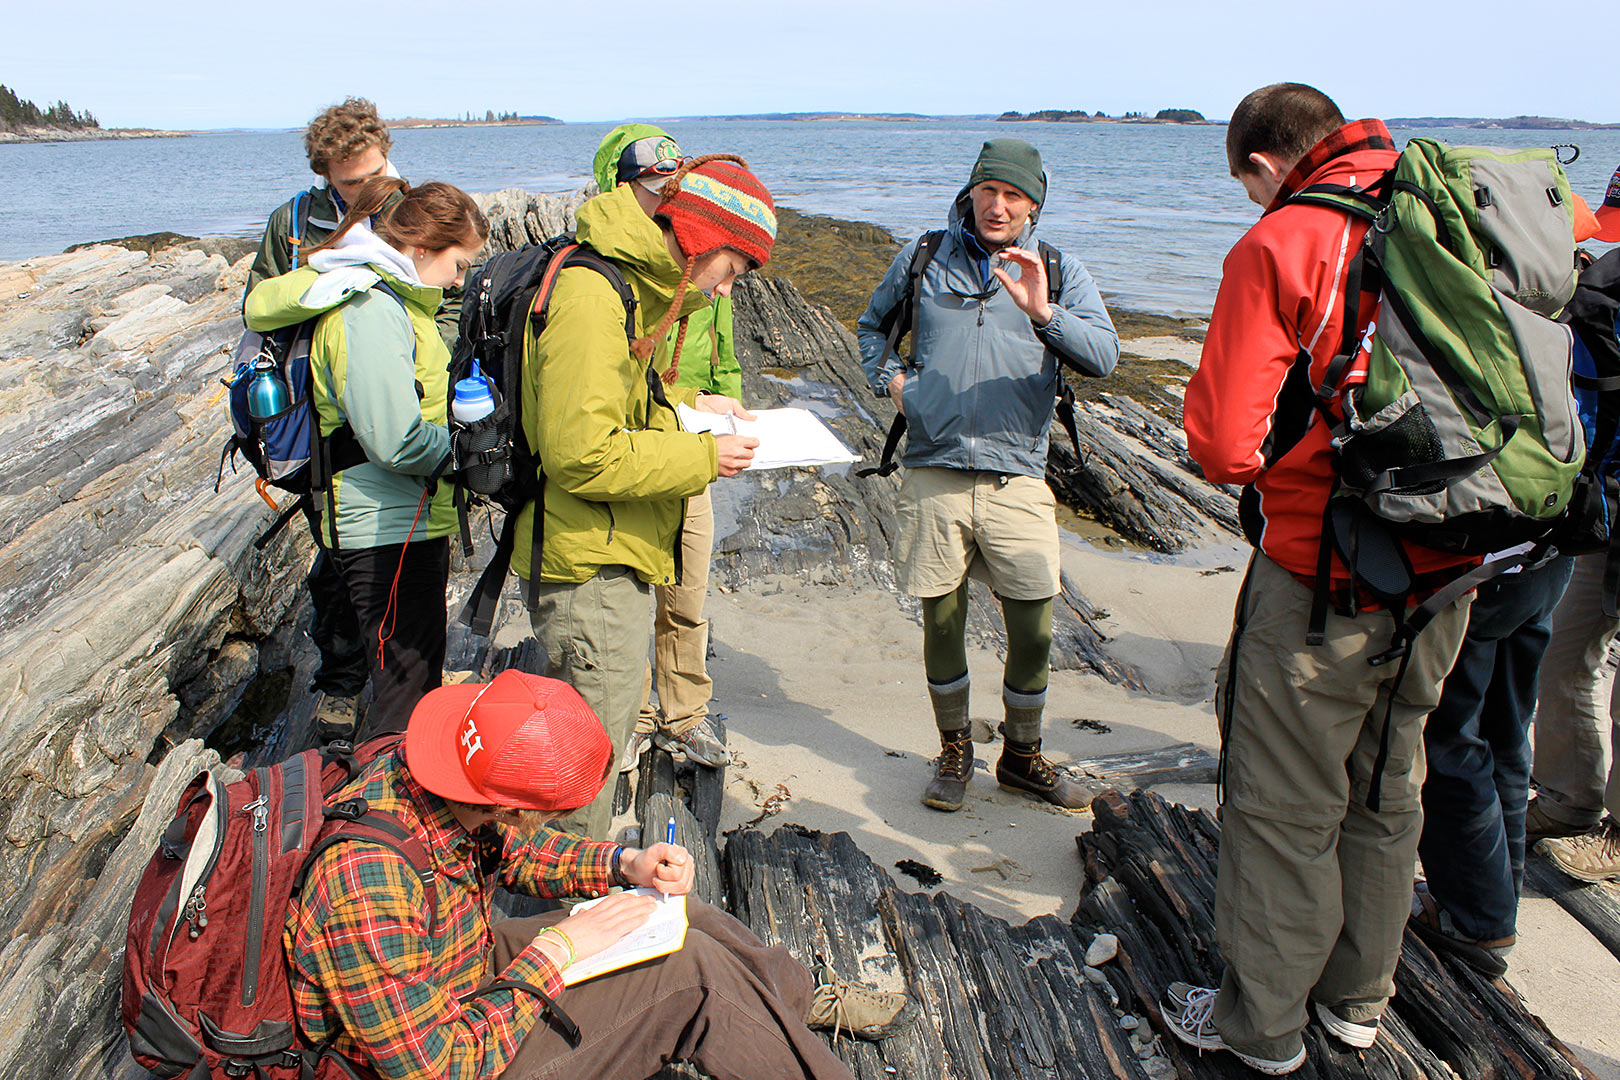 During a field trip to Cliff Island, Professor of Geology Dykstra Eusden '80 teaches students how to identify and measure different rock formations in order to create a map in ArcGIS, a mapping and spacial analysis tool. (Judson Peck '11)